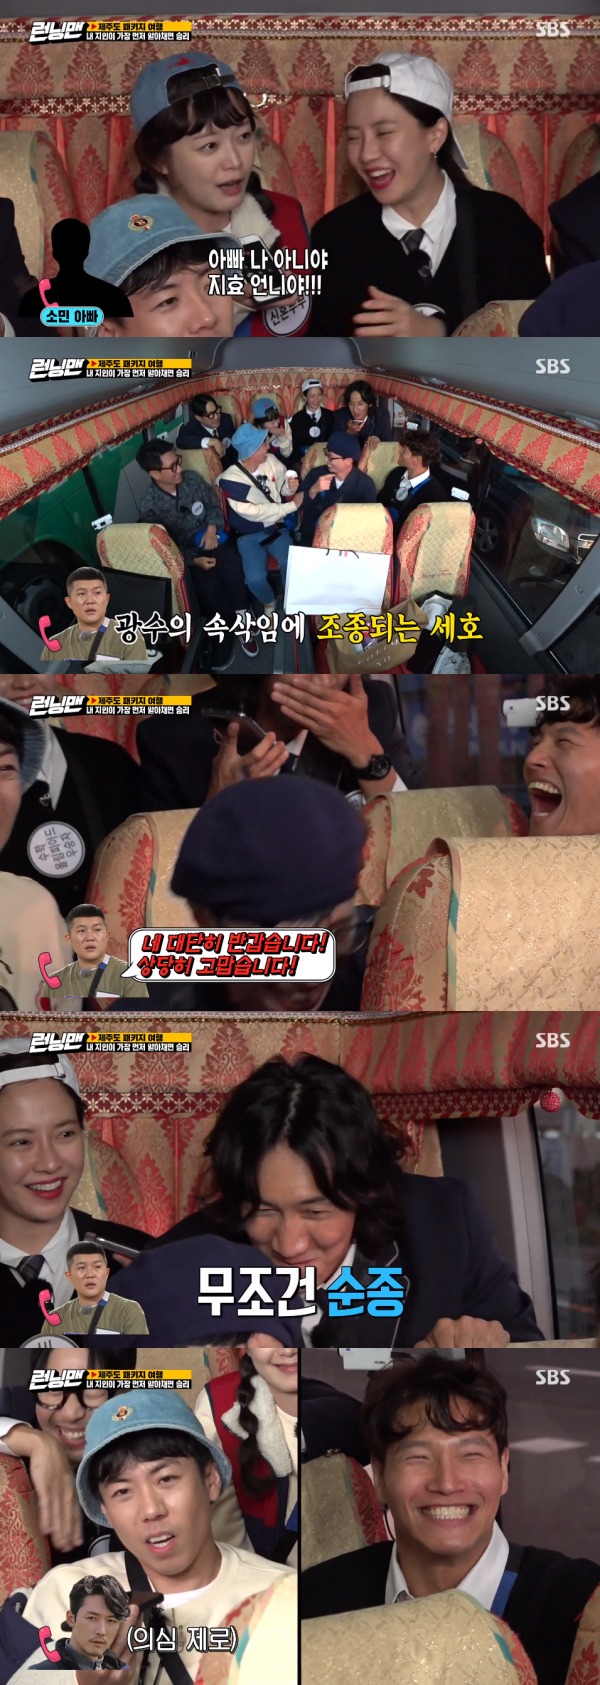 Seoul = = Running Man Lee Kwang-soo cheated Jo Se-ho by pretending to be Yoo Jae-Suk.On SBS Running Man broadcasted on the 8th, Jeju Island package Travel Race was held.The second game on this day is to deceive the acquaintance of Running Man member by phone.Full-fledged Game former Yoo Jae-Suk changed his voice and received a call from his Ji Suk-jin wife, pretending to be Ji Suk-jin.Ji Suk-jins wife didnt know it was Yoo Jae-Suk at first, but in 10 seconds she noticed it was Yoo Jae-Suk.Song Ji-hyo called Jeon So-mins parents pretending to be Jeon So-min, whose mother and father were also fooled by Song Ji-hyo.Lee Kwang-soo whispered to Jo Se-ho, an acquaintance of Yoo Jae-Suk, pretending to be Yoo Jae-Suk.Jo Se-ho gave a laugh to Purebred to Lee Kwang-soos instructions without dreaming that it would not be Yoo Jae-Suk.Jang Hyuk, who believed Yang Se-chan was Kim Jong-kook and released a bundle of chatter, showed off his real friendship, saying, I am not close to Kim Jong-kook.As a result of the mission, Yang Se-chan succeeded in the mission thanks to the suspicious Kang Jae-joon.Kang Jae-joon noticed that it was not Yang Se-chan 15 seconds after talking to Kim Jong-kook.But the real Yang Se-chans voice did not raise doubts, causing a laugh.Jeon So-min, Yang Se-chan, Yoo Jae-Suk and Ji Suk-jin, who have experienced life shot shooting courses, decided to receive pictures taken by veteran filmmakers.The four paid 250,000 won for the photo shoot alone, while the other four played Game to pick out the person to pay.Game results show Song Ji-hyo and Lee Kwang-soo teams are poisoned.